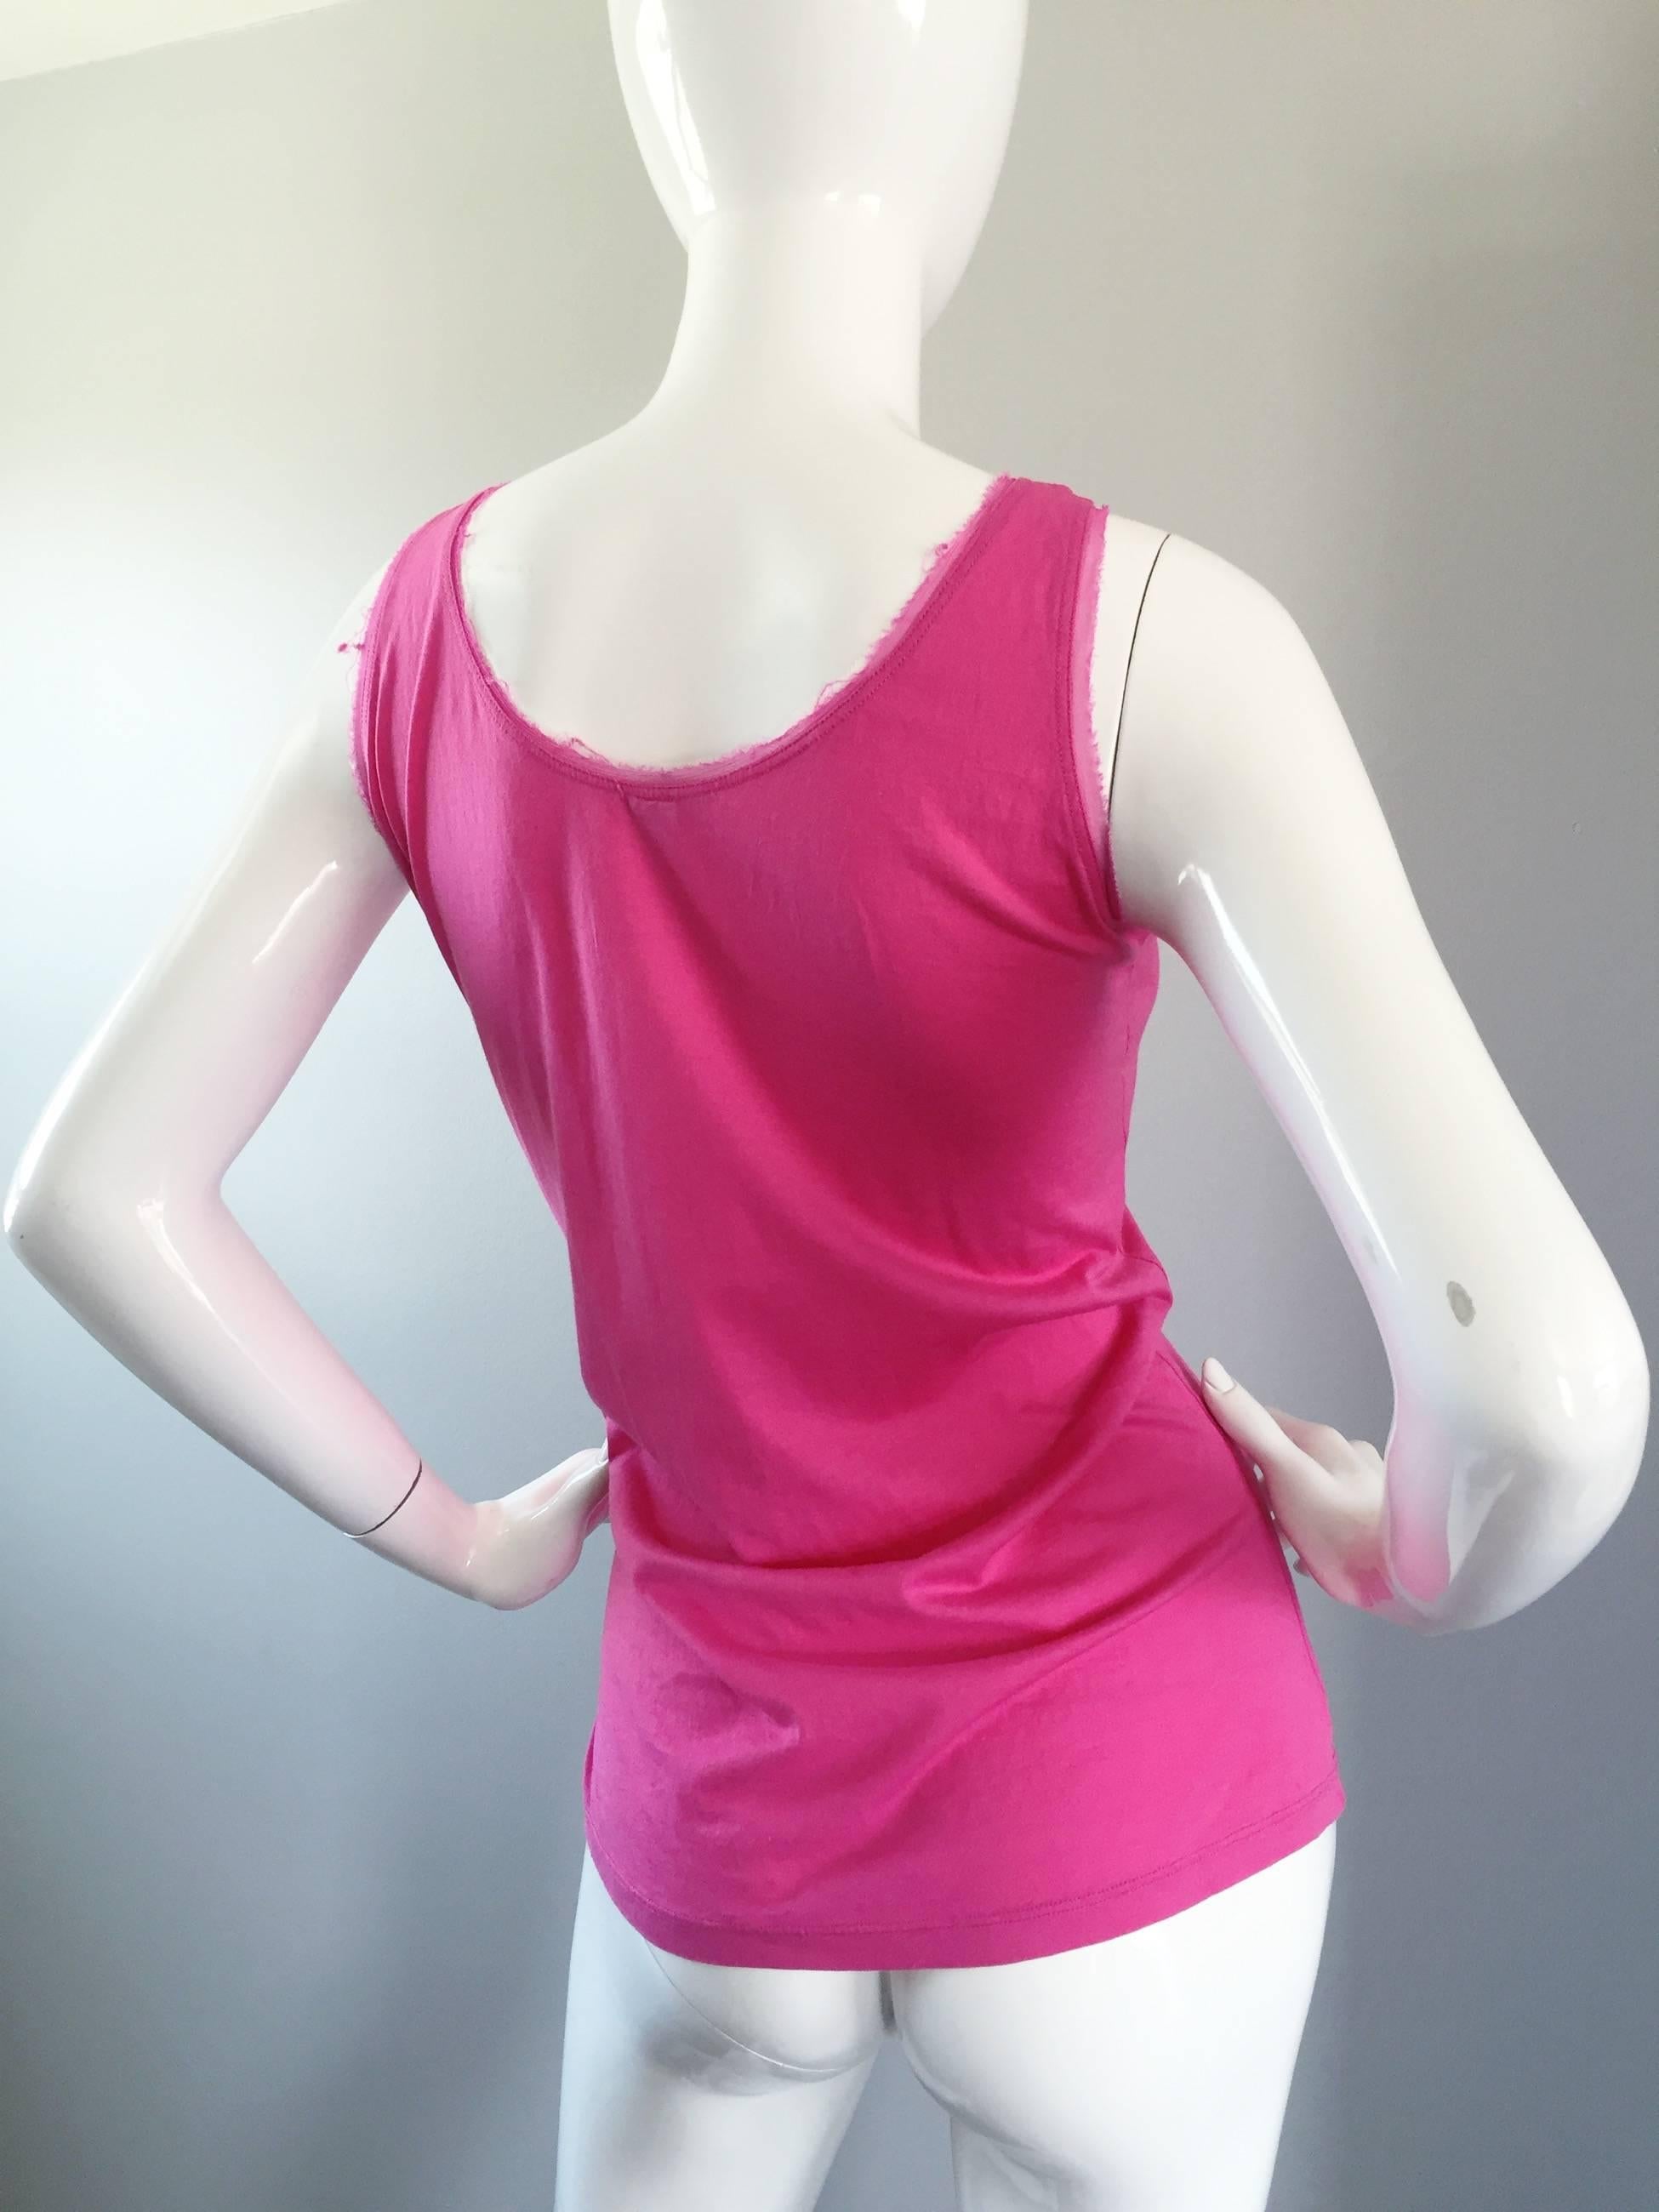 John Galliano Hot Pink + White Sleeveless Cotton Blouse w/ Lace Cut - Outs  For Sale 1